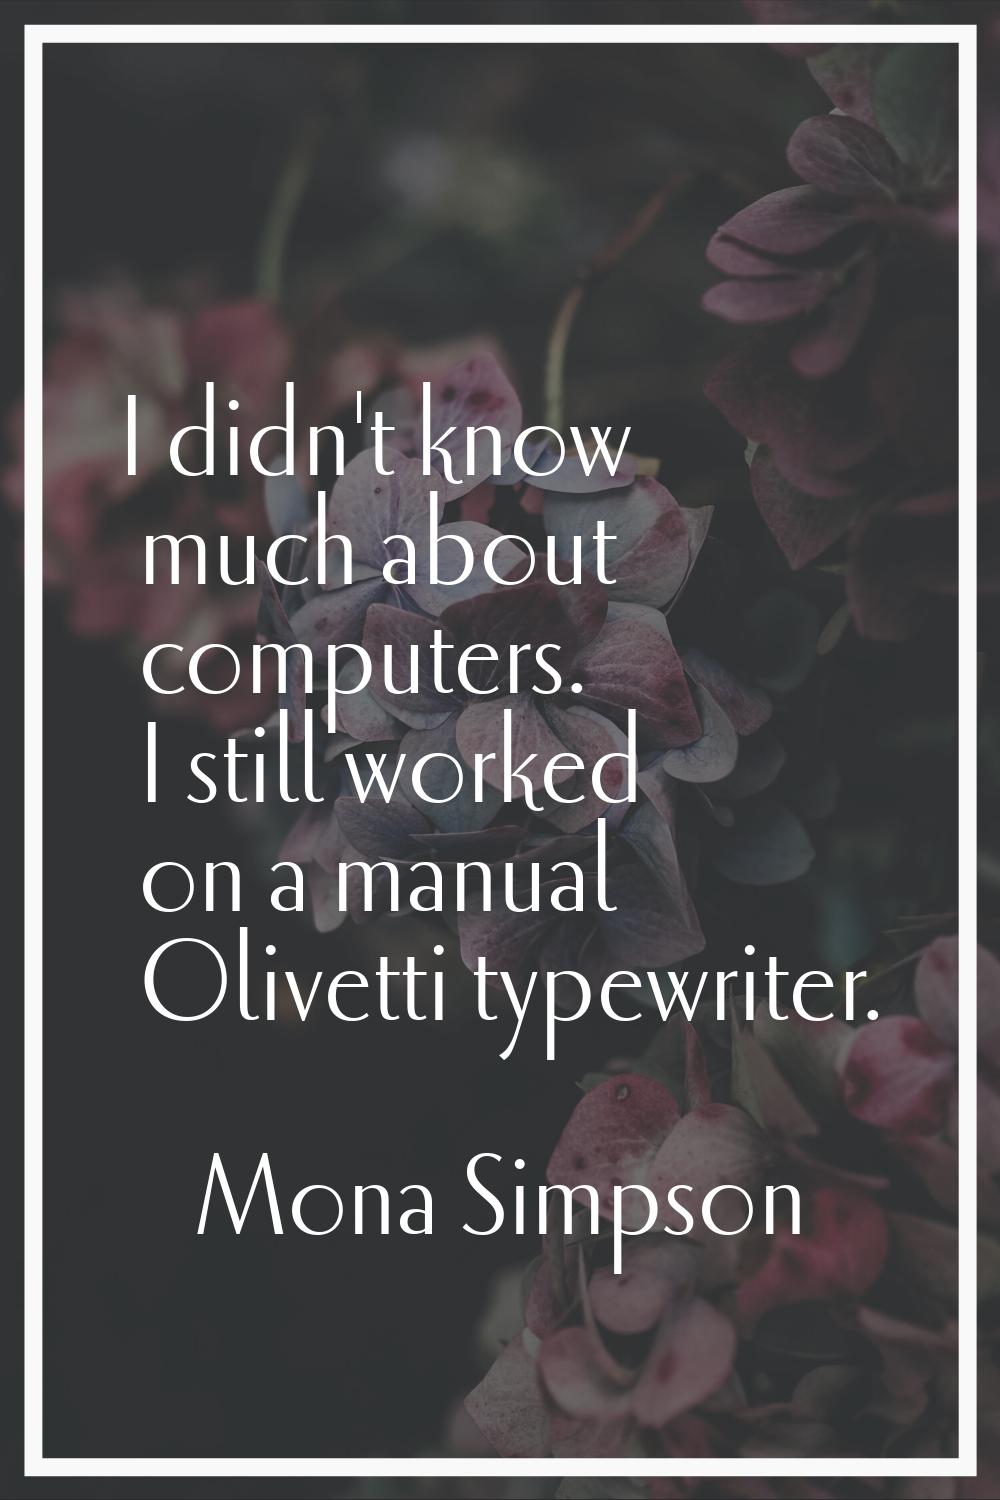 I didn't know much about computers. I still worked on a manual Olivetti typewriter.